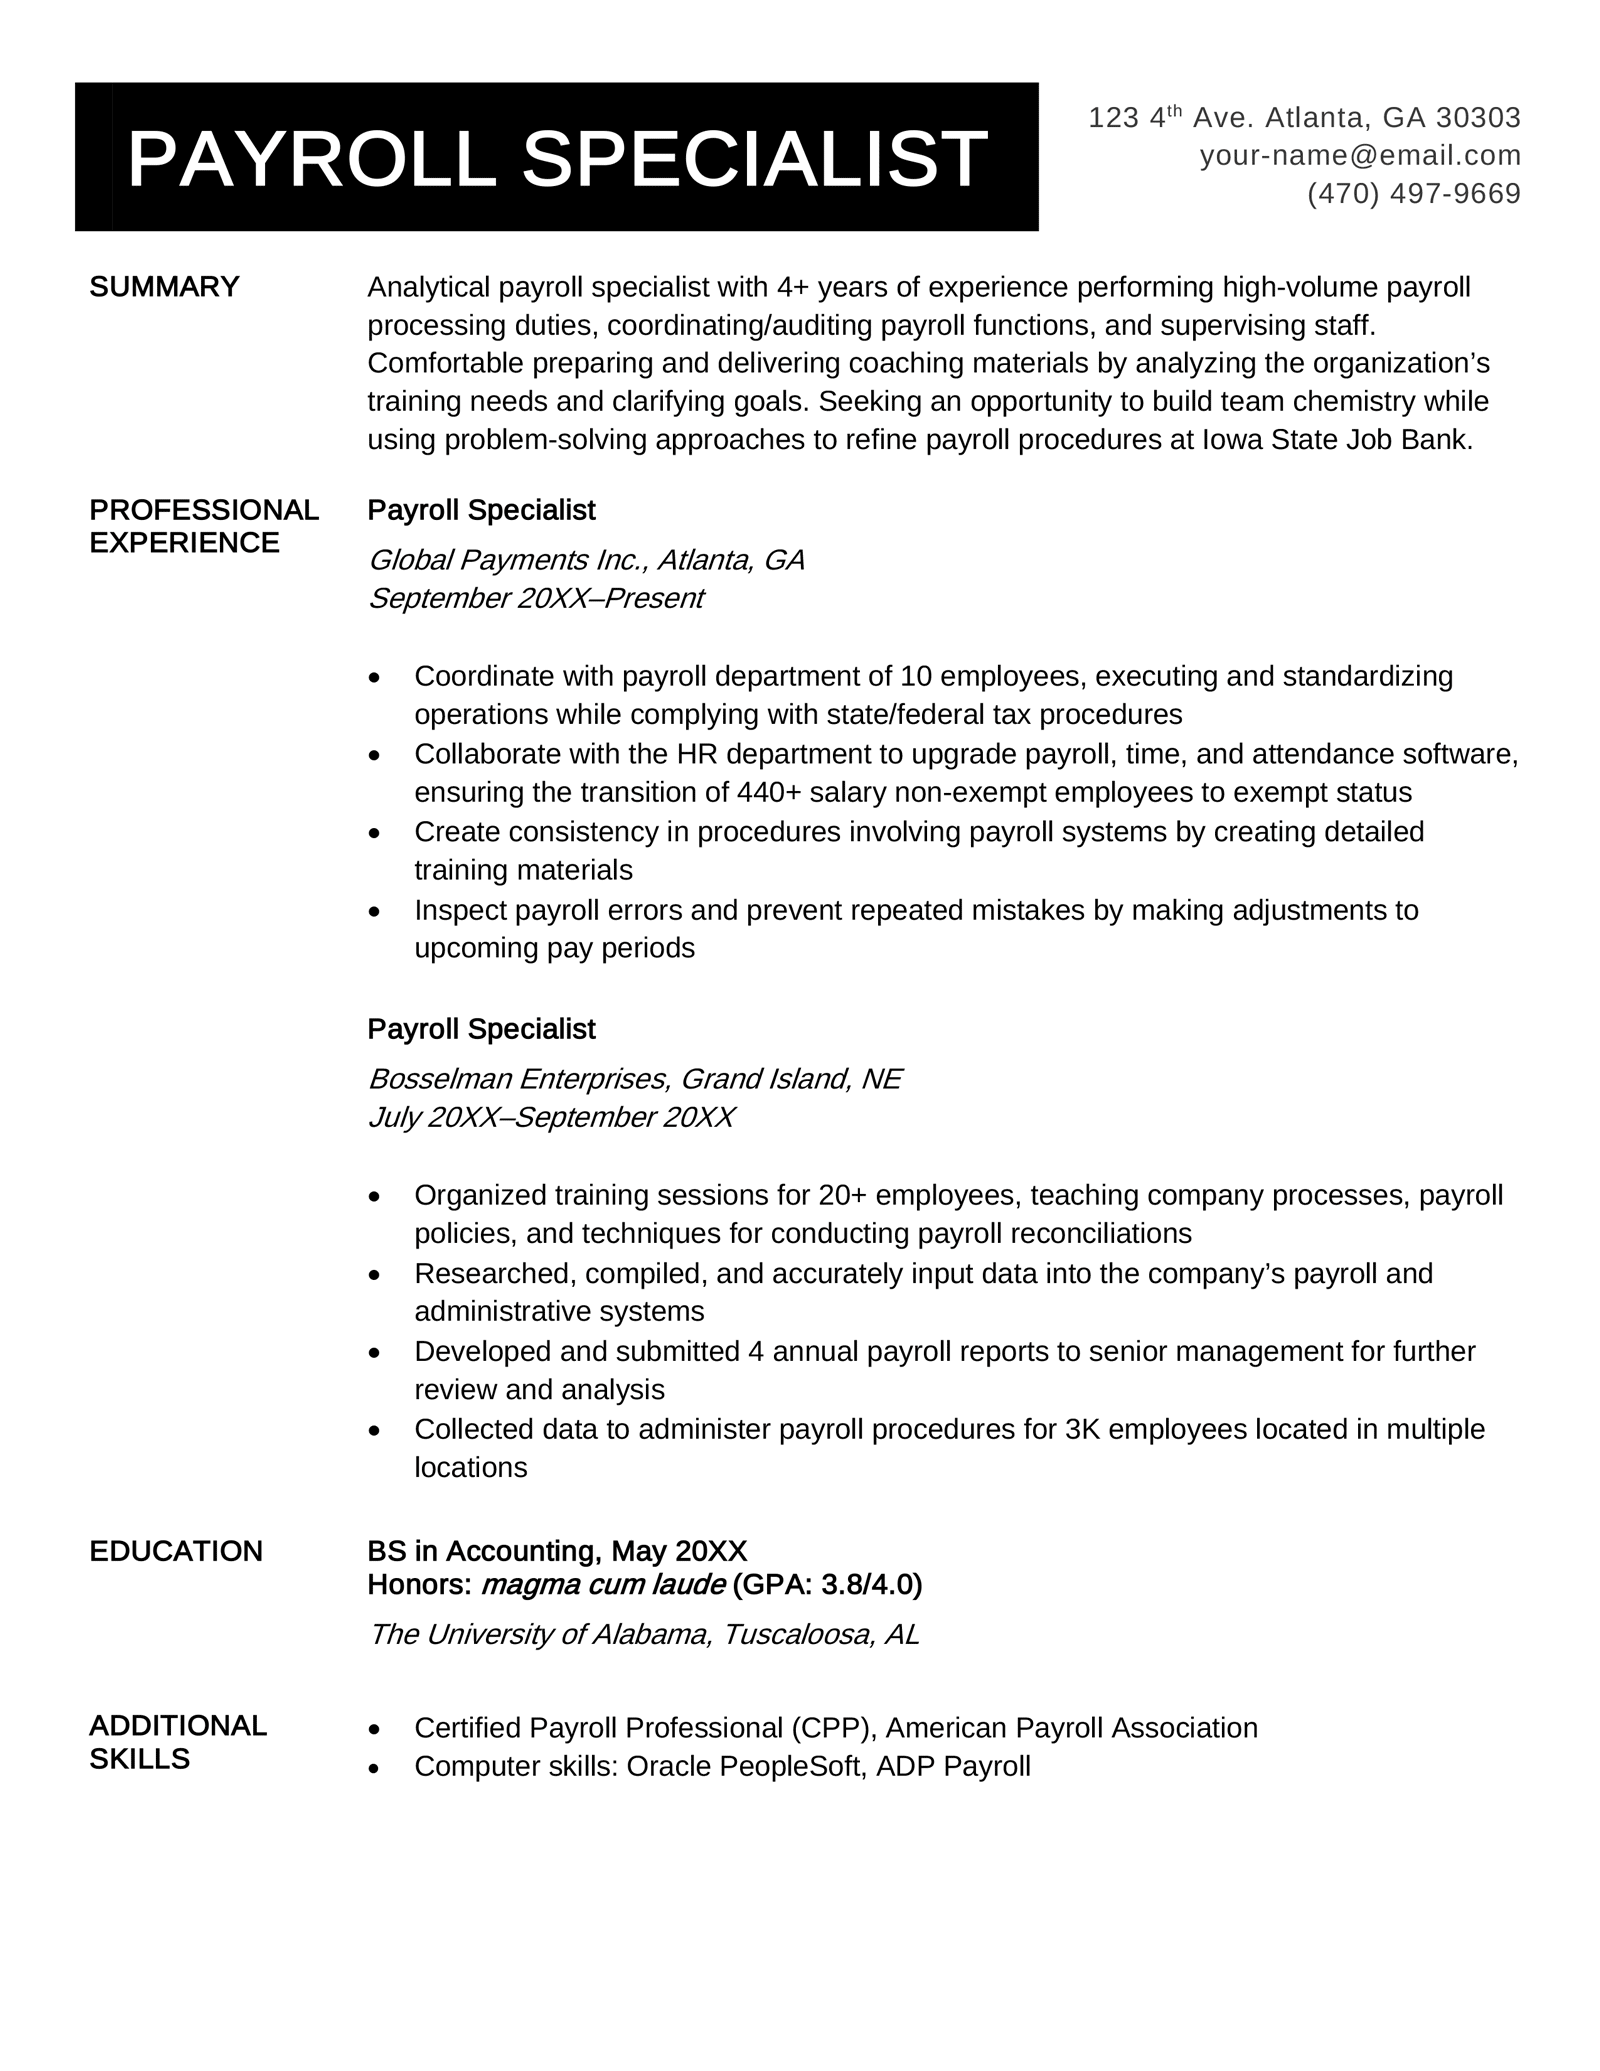 A payroll specialist resume example with a black header, a summary, as well as professional experience, education and additional skills sections